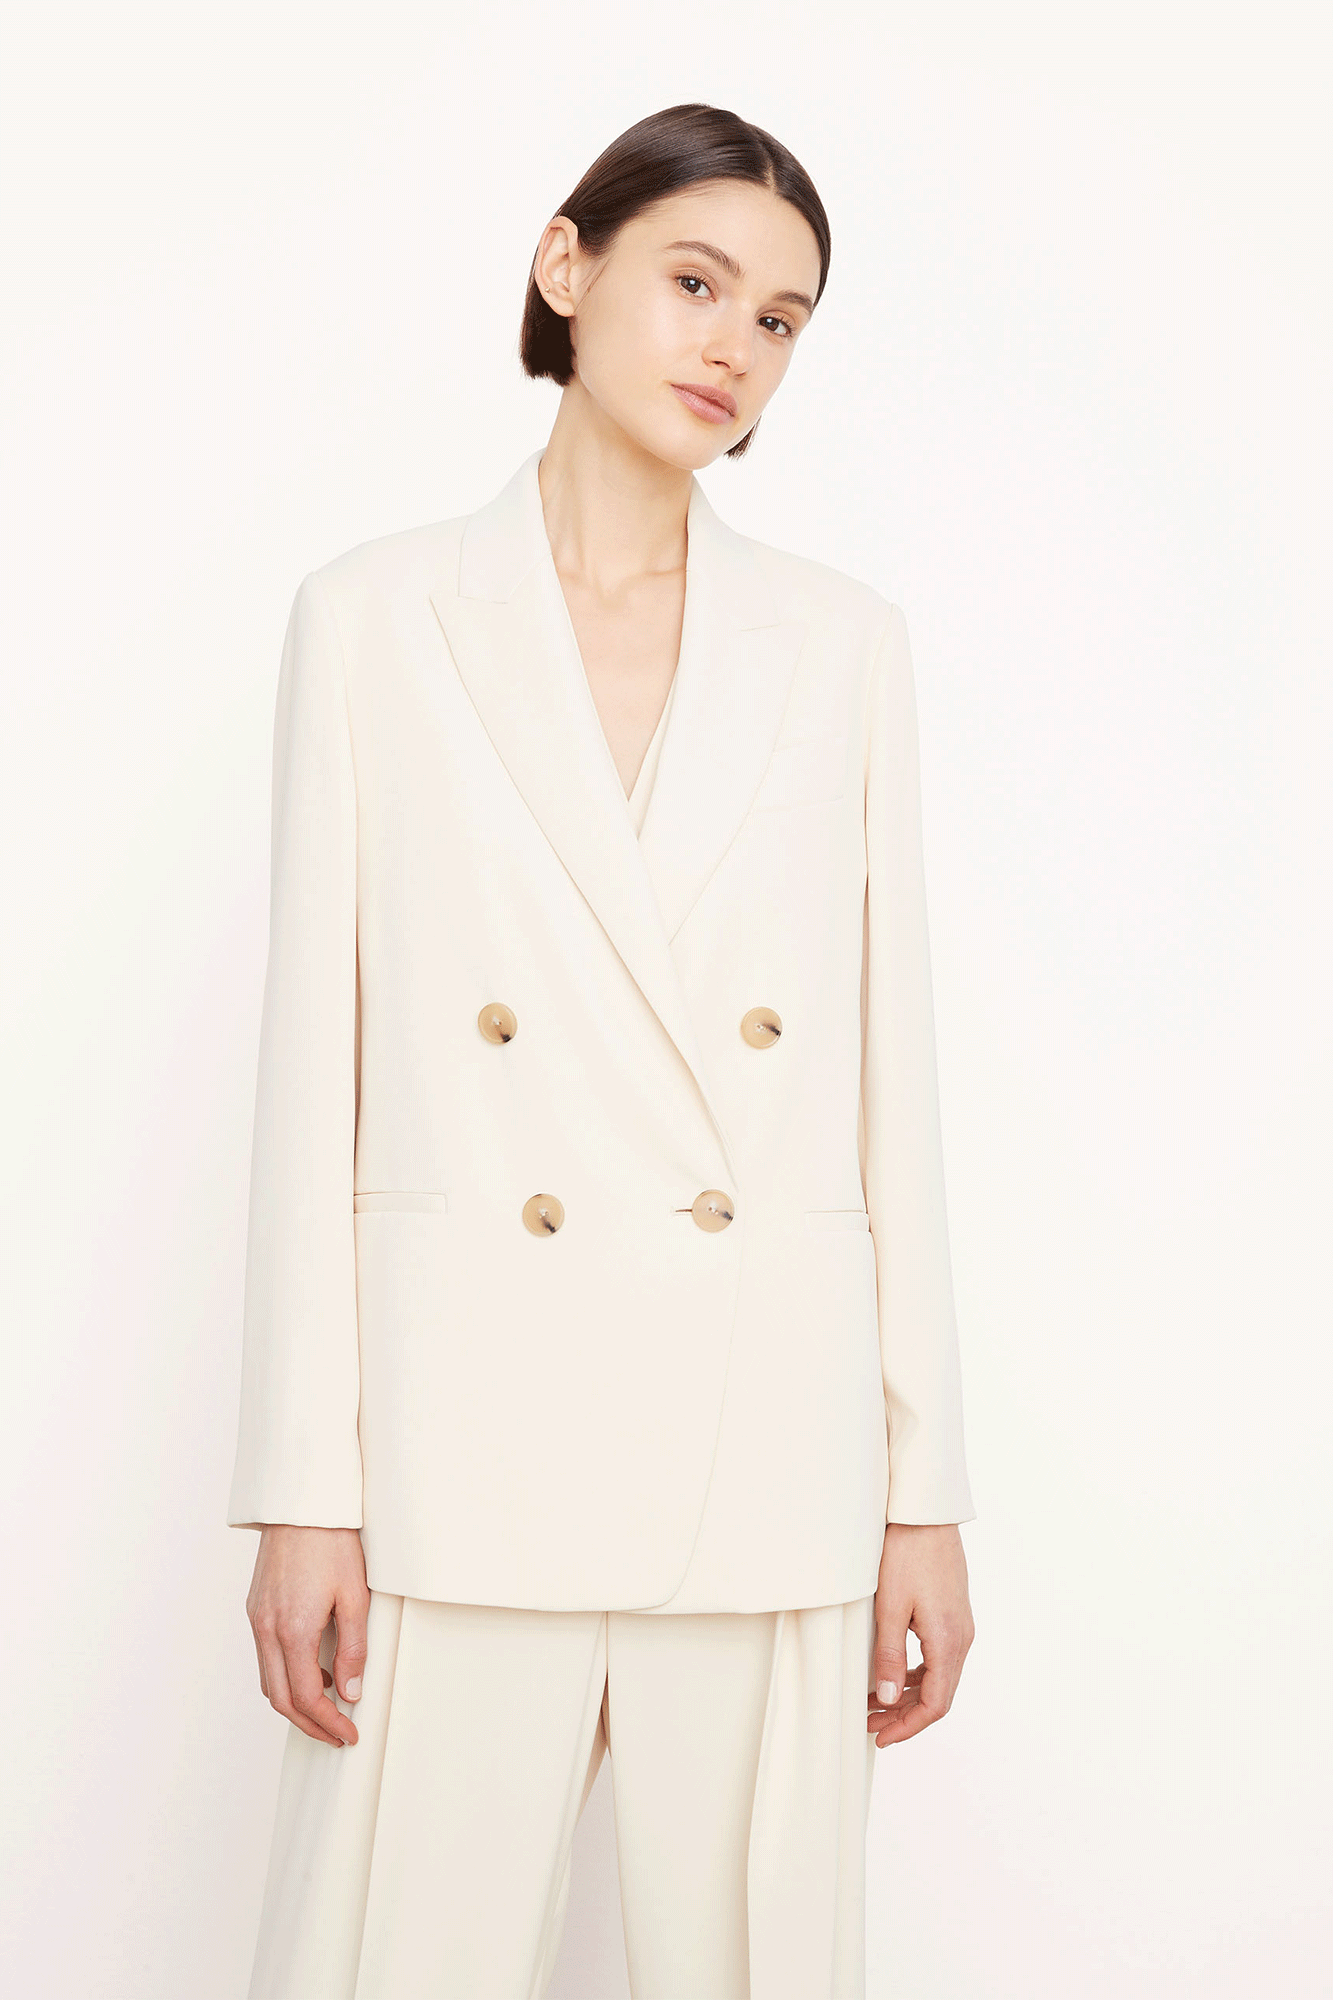 Our Crepe Double Breast Blazer from Vince offers a sleek addition to any wardrobe.